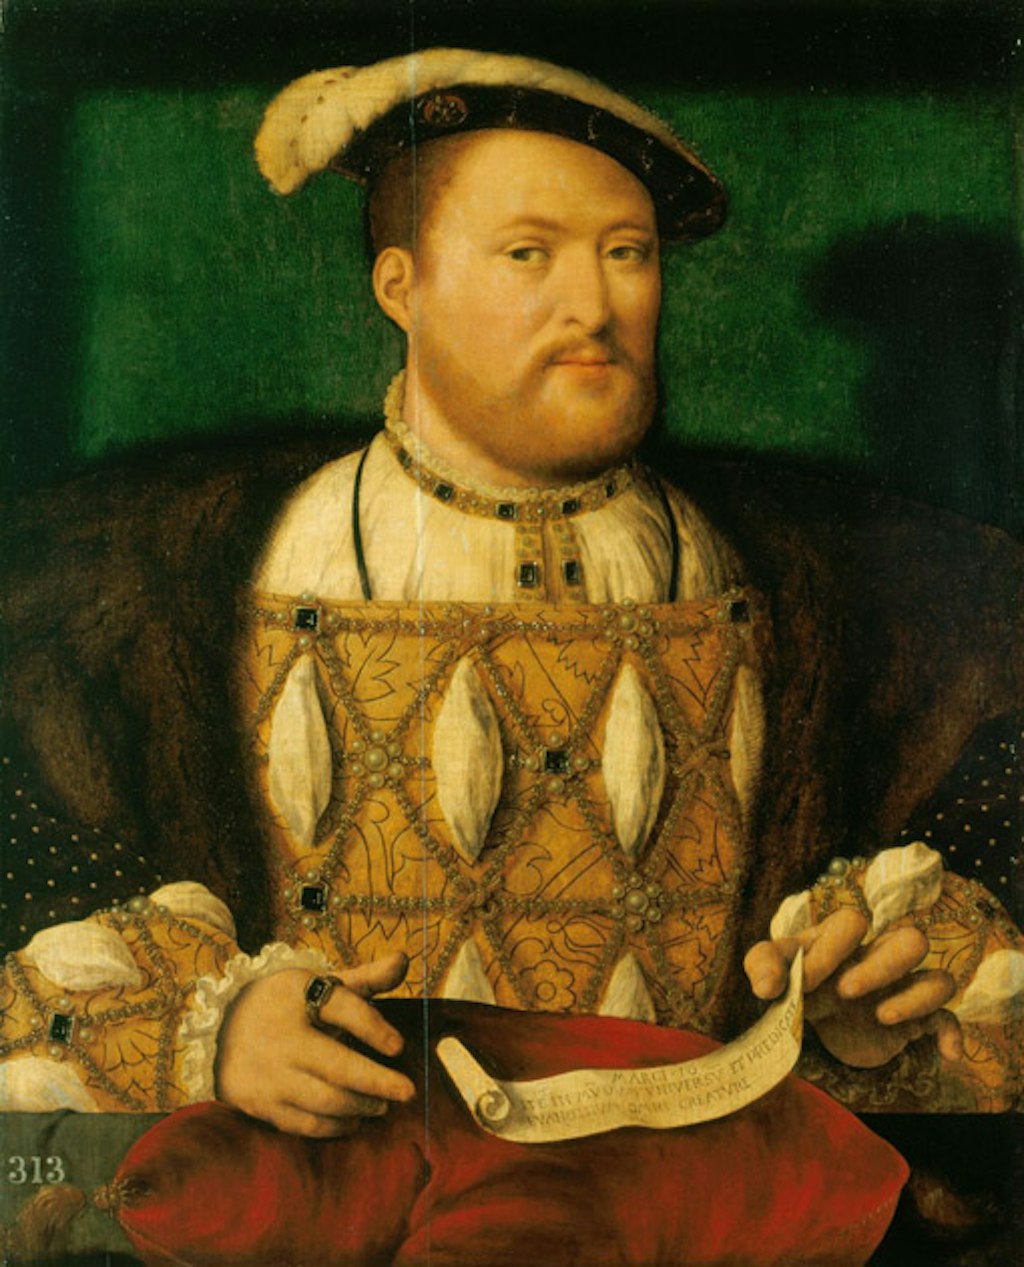 The head and torso of a bearded man wearing a feathered hat and fine clothes seated at a table with a scroll between his hands.